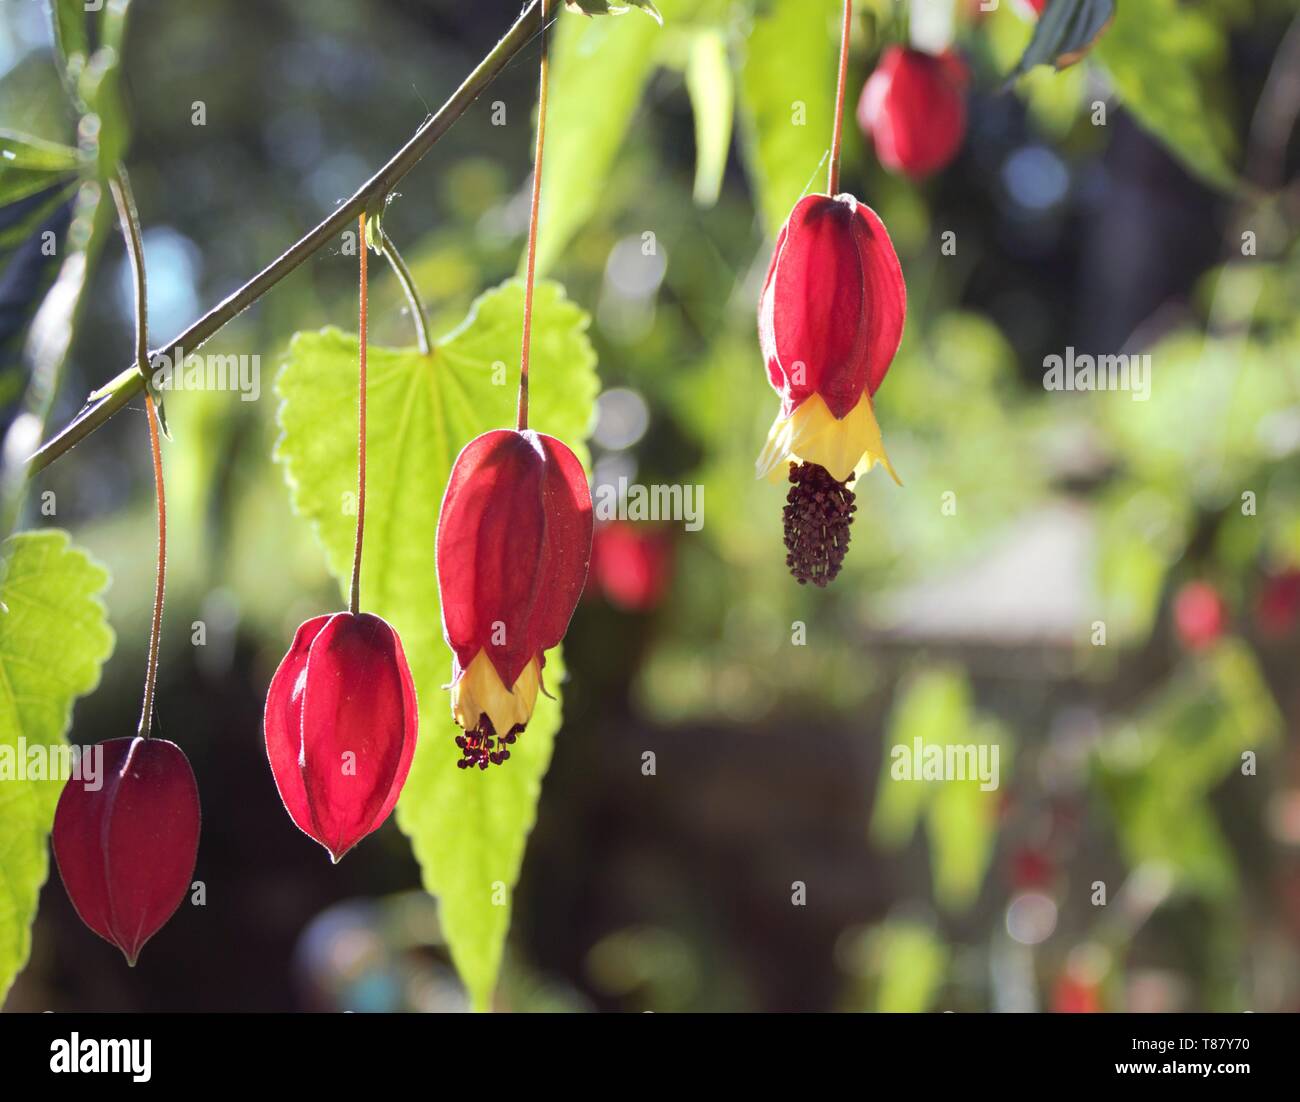 The red Calyx of a Trailing Abutilon (Abutilon  Megapotamicum)in full bloom revealing their yellow petals. Stock Photo